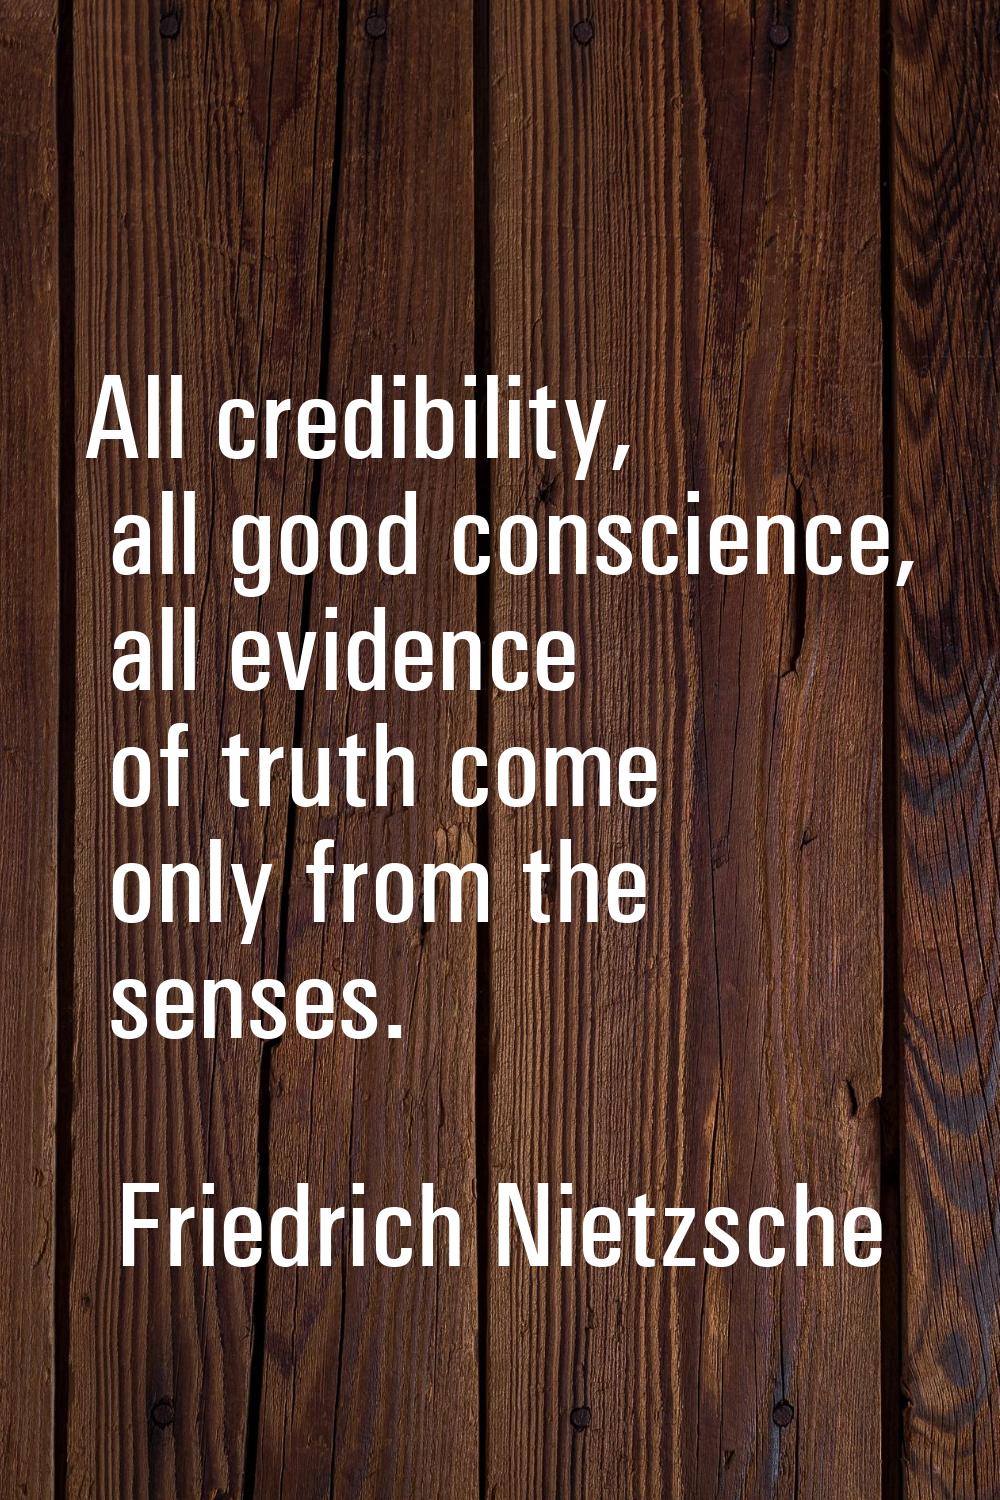 All credibility, all good conscience, all evidence of truth come only from the senses.